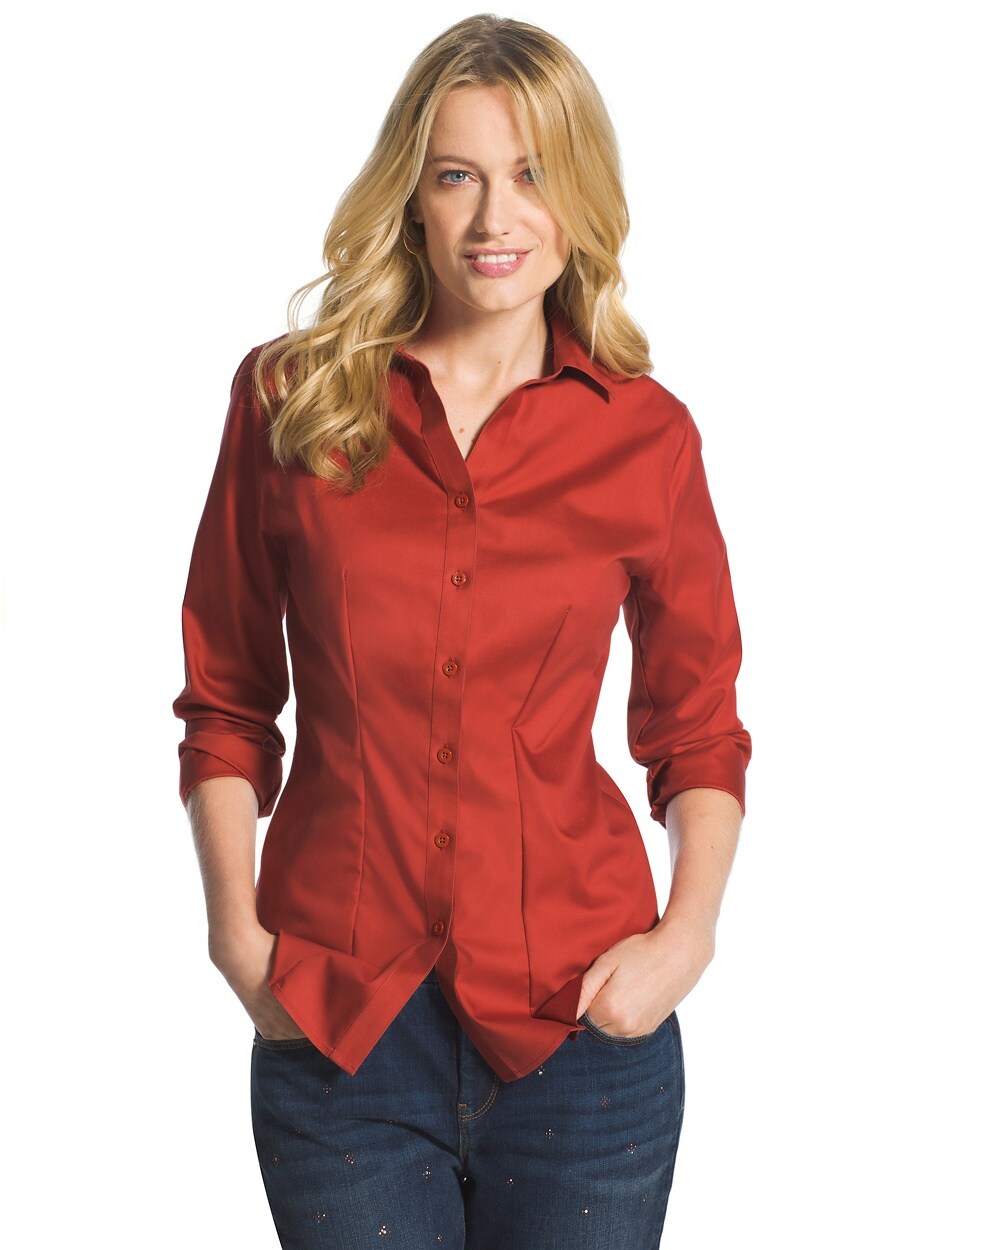 Effortless Caroline Button-Down Shirt video preview image, click to start video